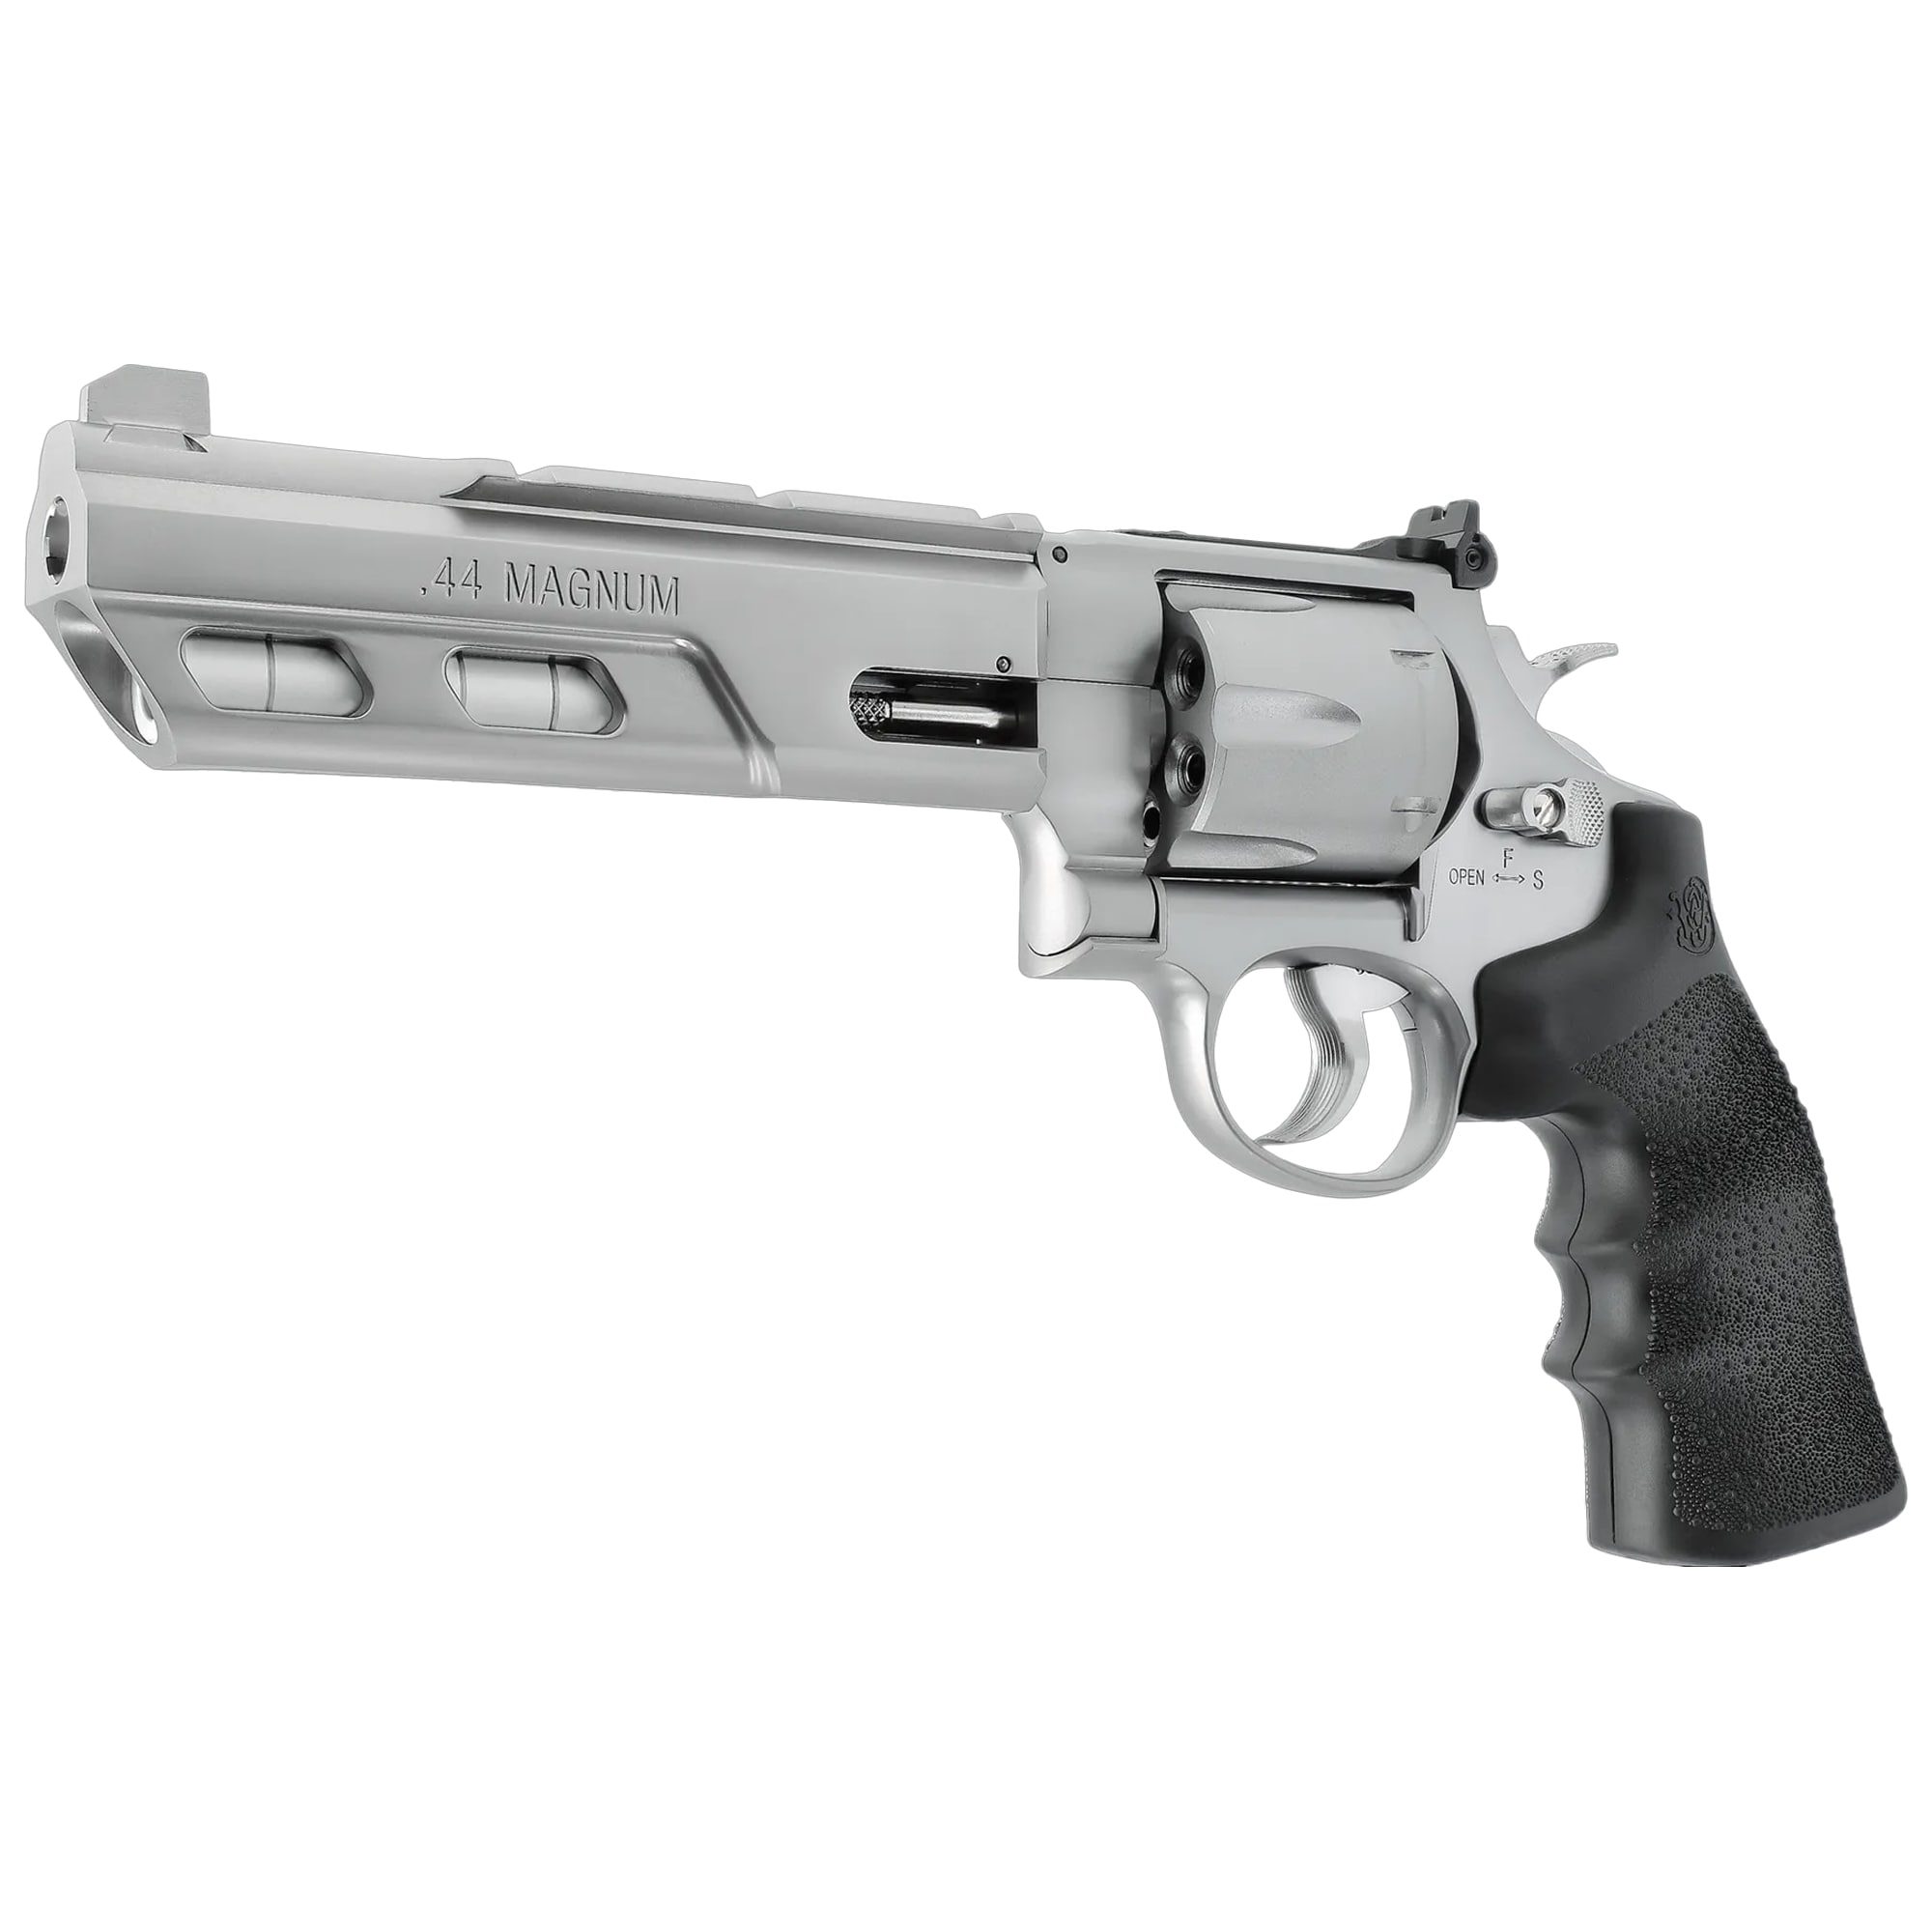 Rewolwer GNB Umarex Smith&Wesson CO2 629 Competitor 6